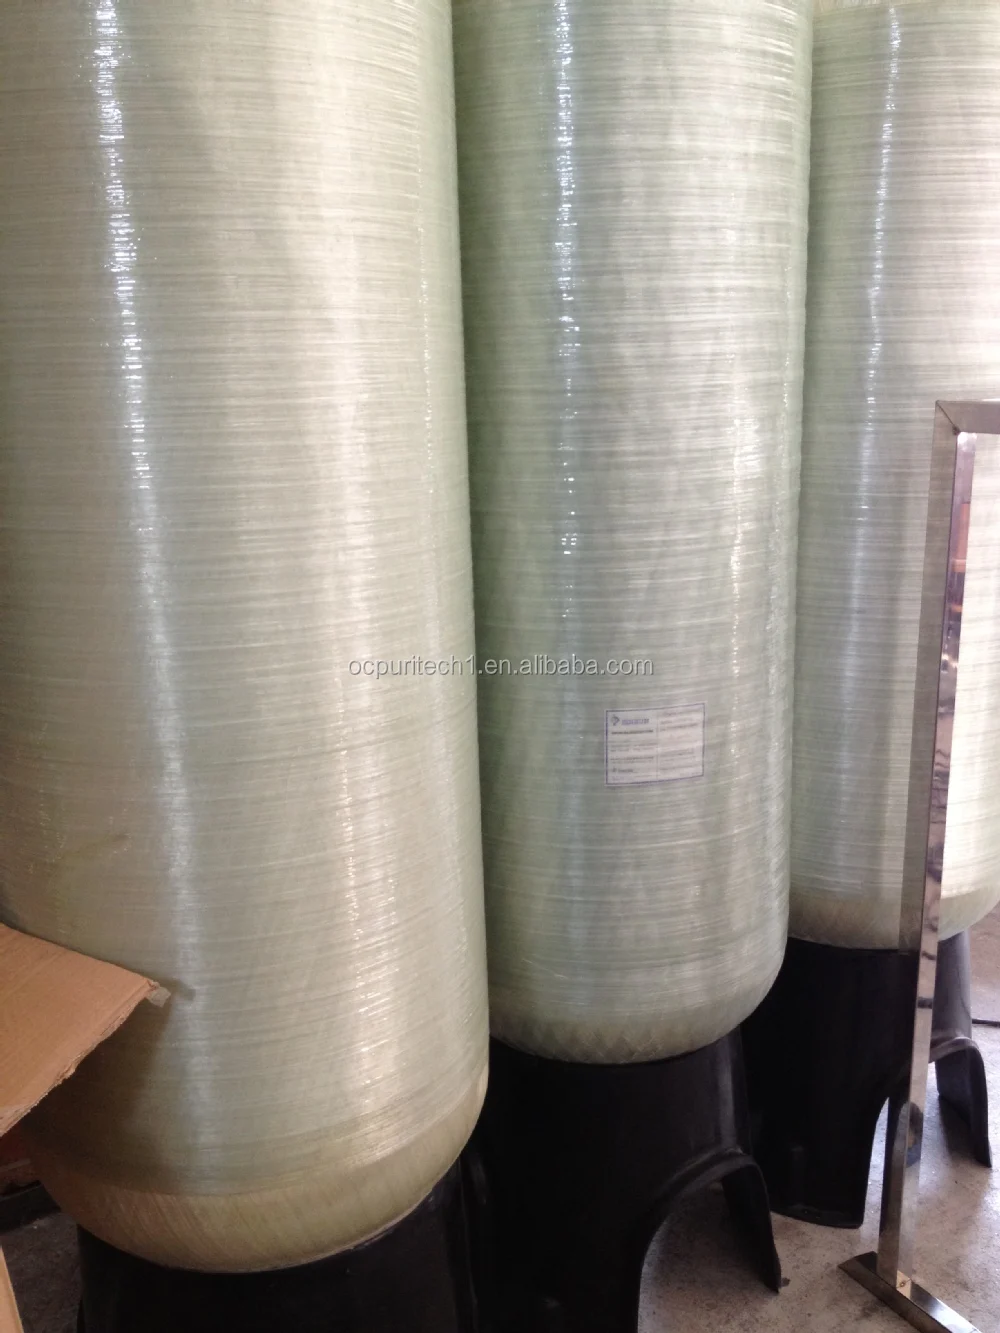 Industrial commercial Water treatment multi media  ro water filter filter pretreatment